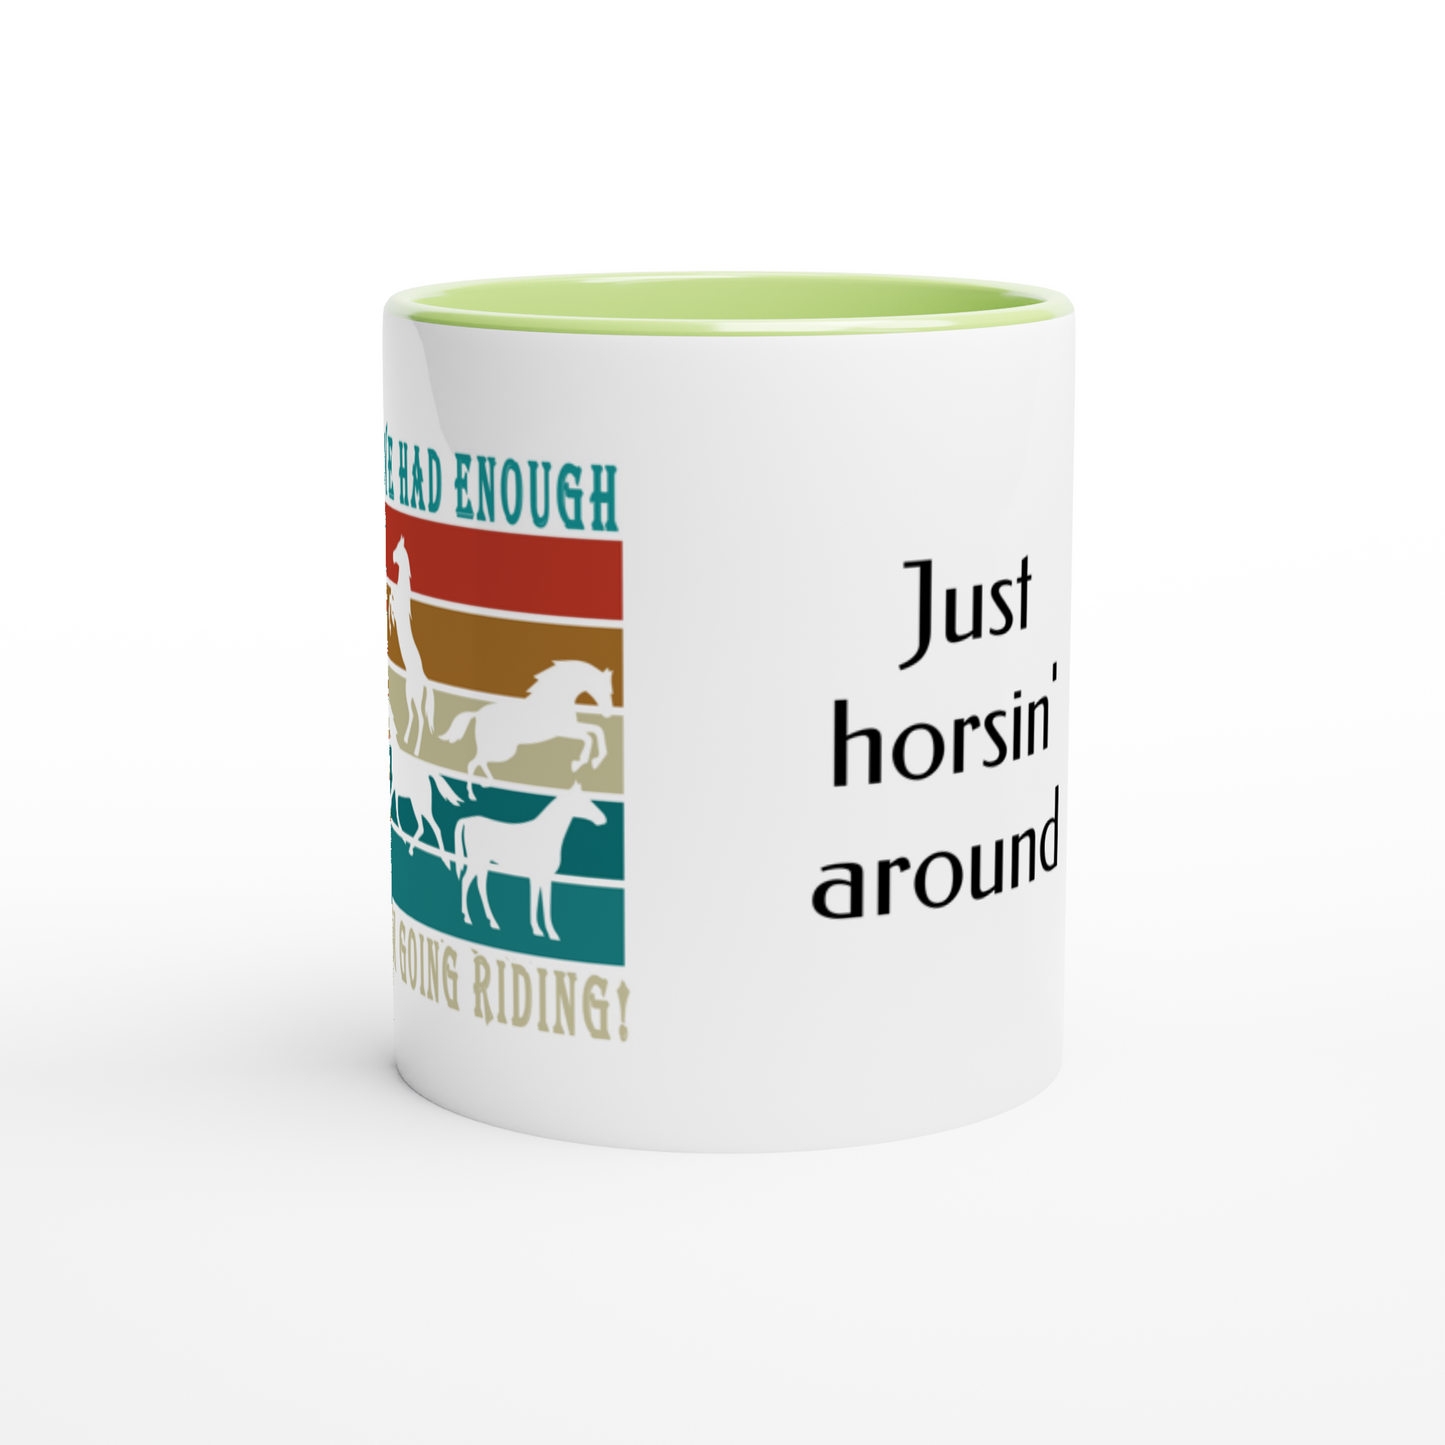 Hand Drawn Horse || 11 oz Ceramic Mug with Color - Design: "Going Riding"; Static Design; Personalizable Text